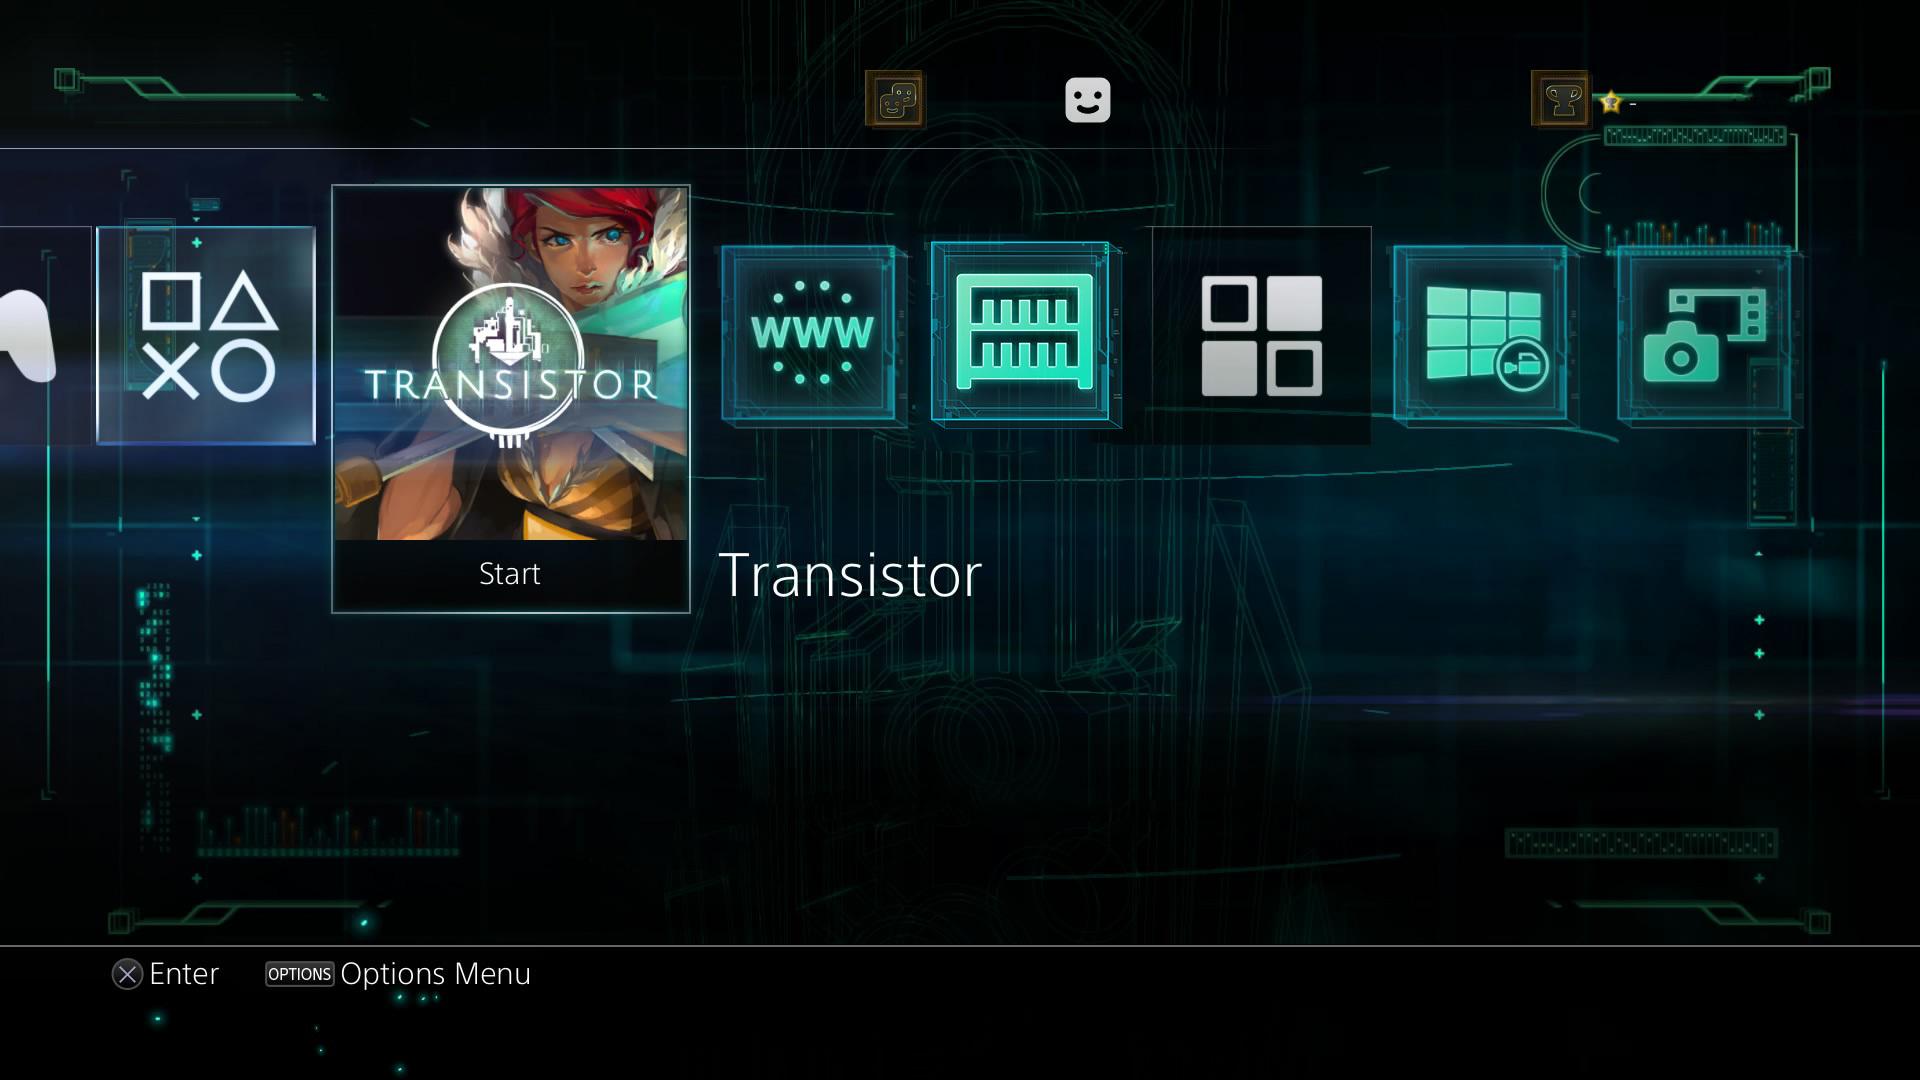 Supergiant Games on Twitter: "Check out our new Transistor Theme for PS4, feat. original art and music from game! $2.99. http://t.co/tHGwiQVN5m http://t.co/D09JAJNqZb" / Twitter